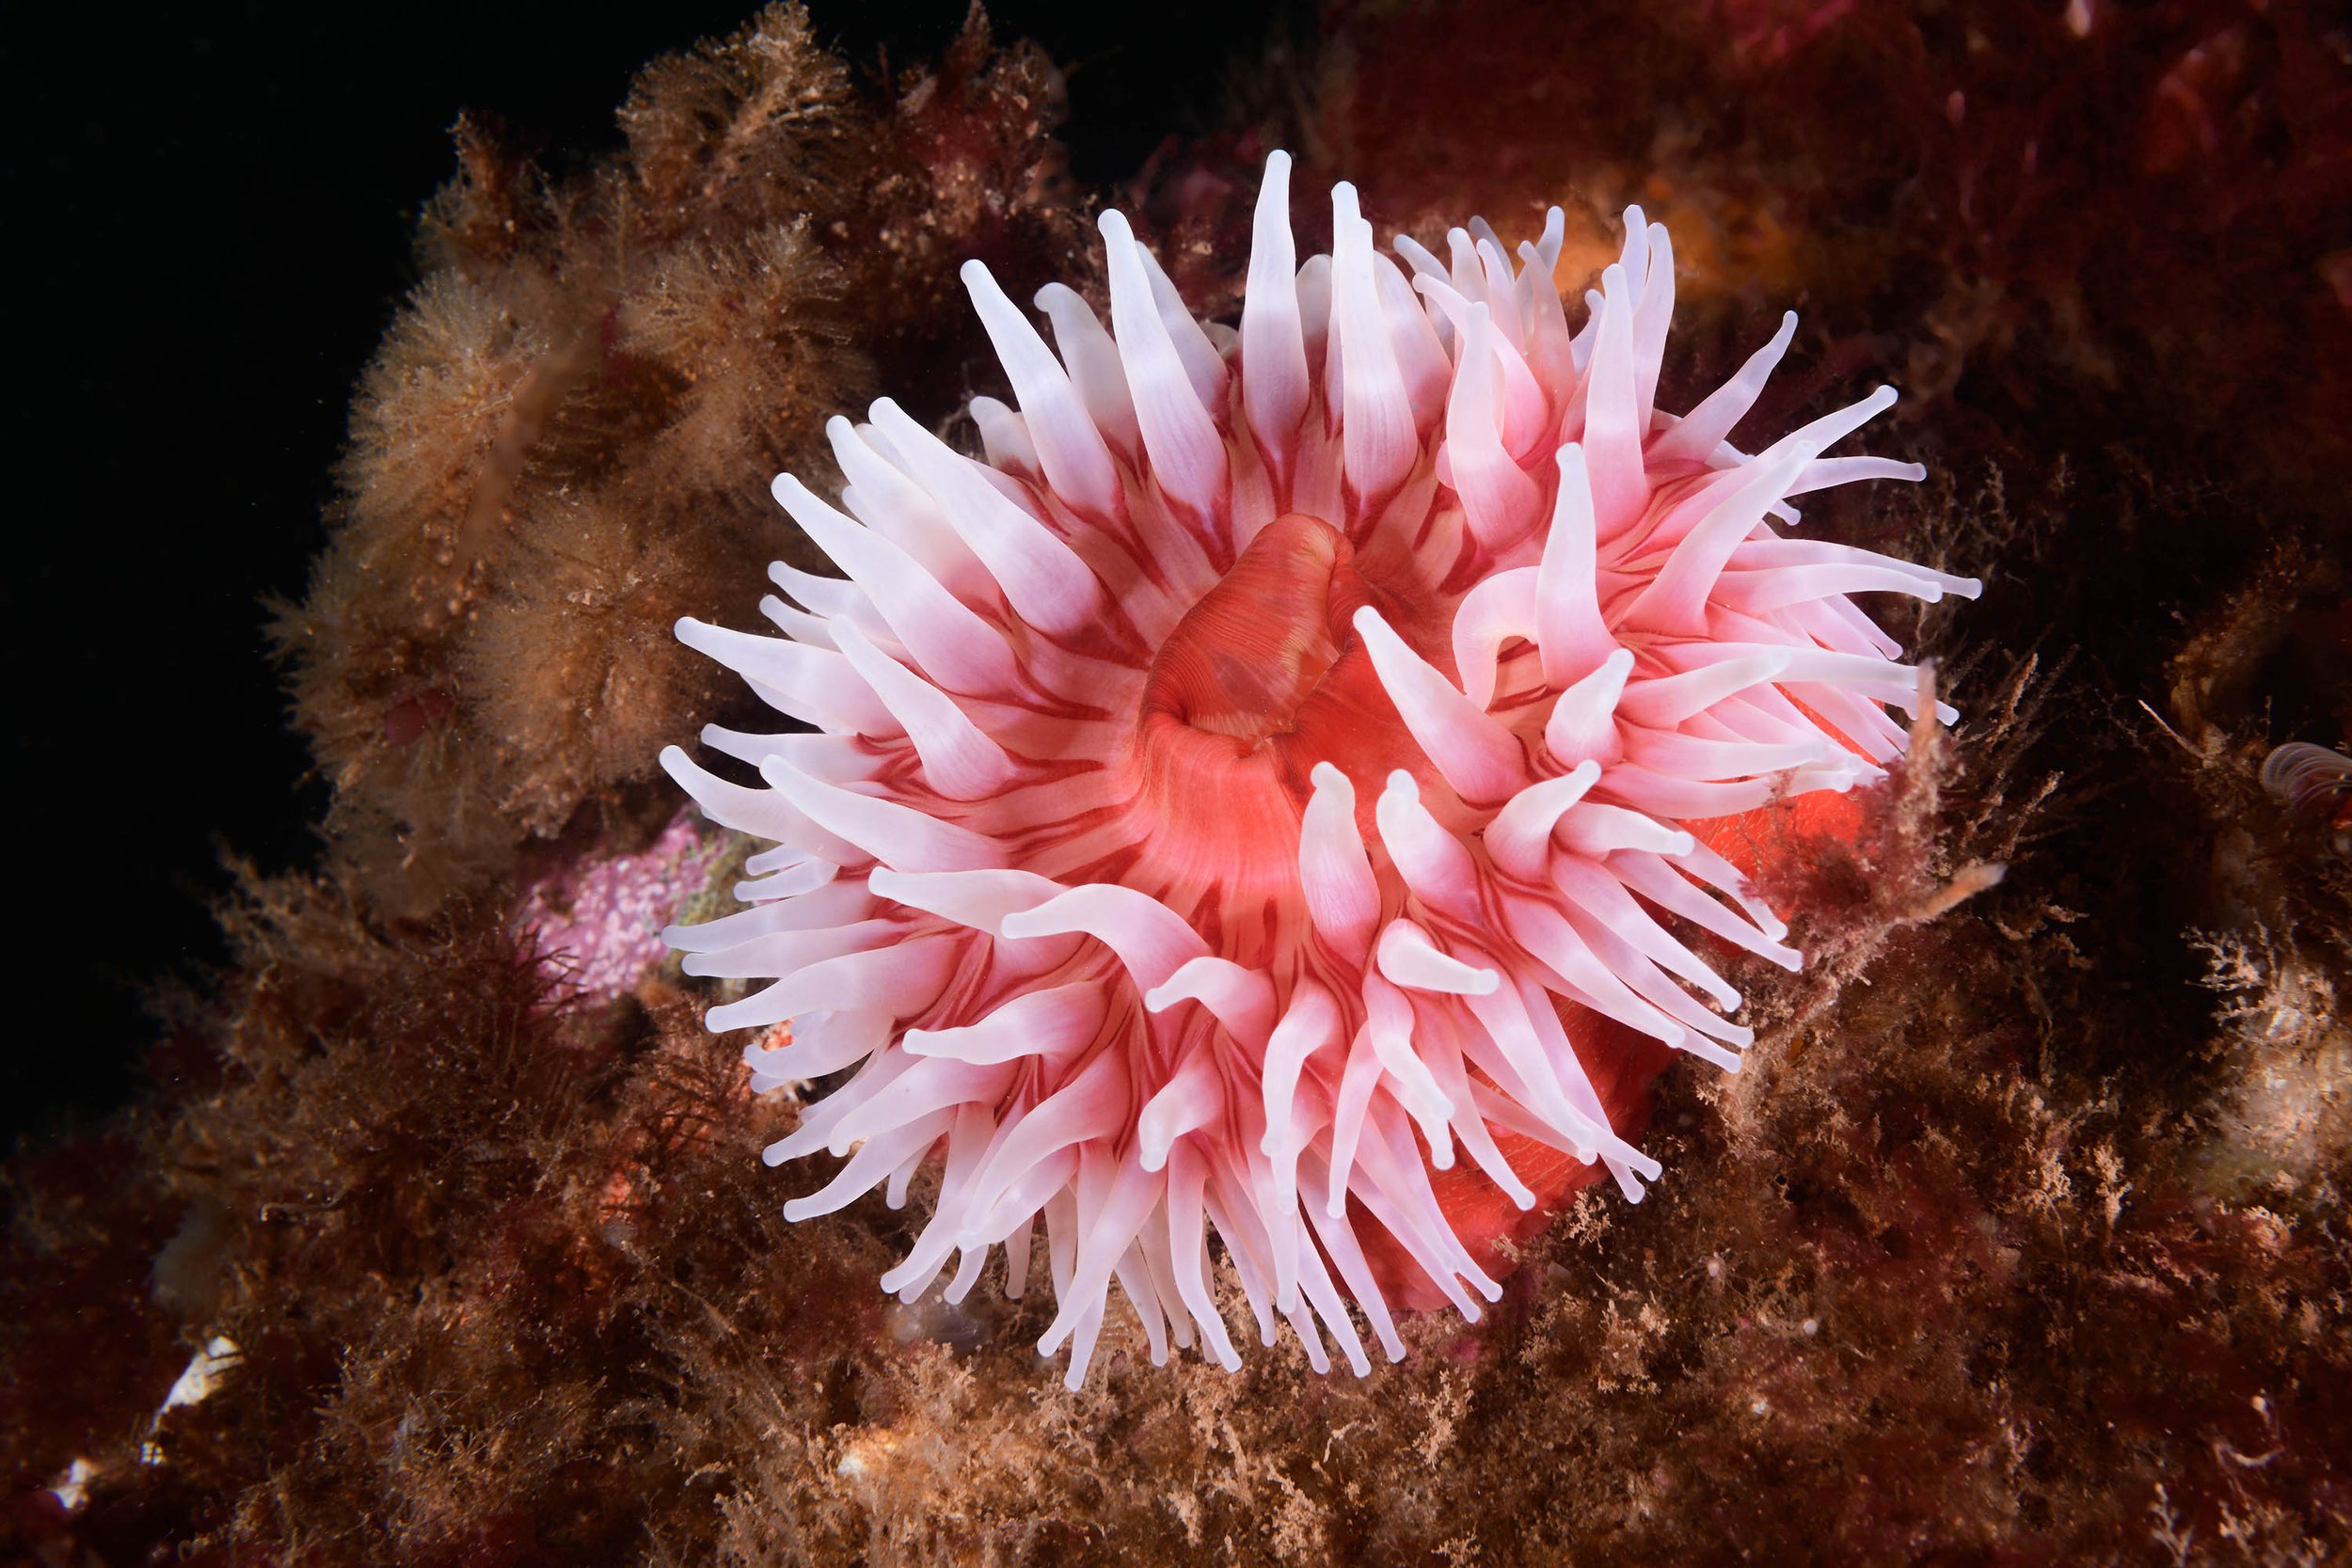   Northern Red Sea Anemome © Andrew Martinez.  